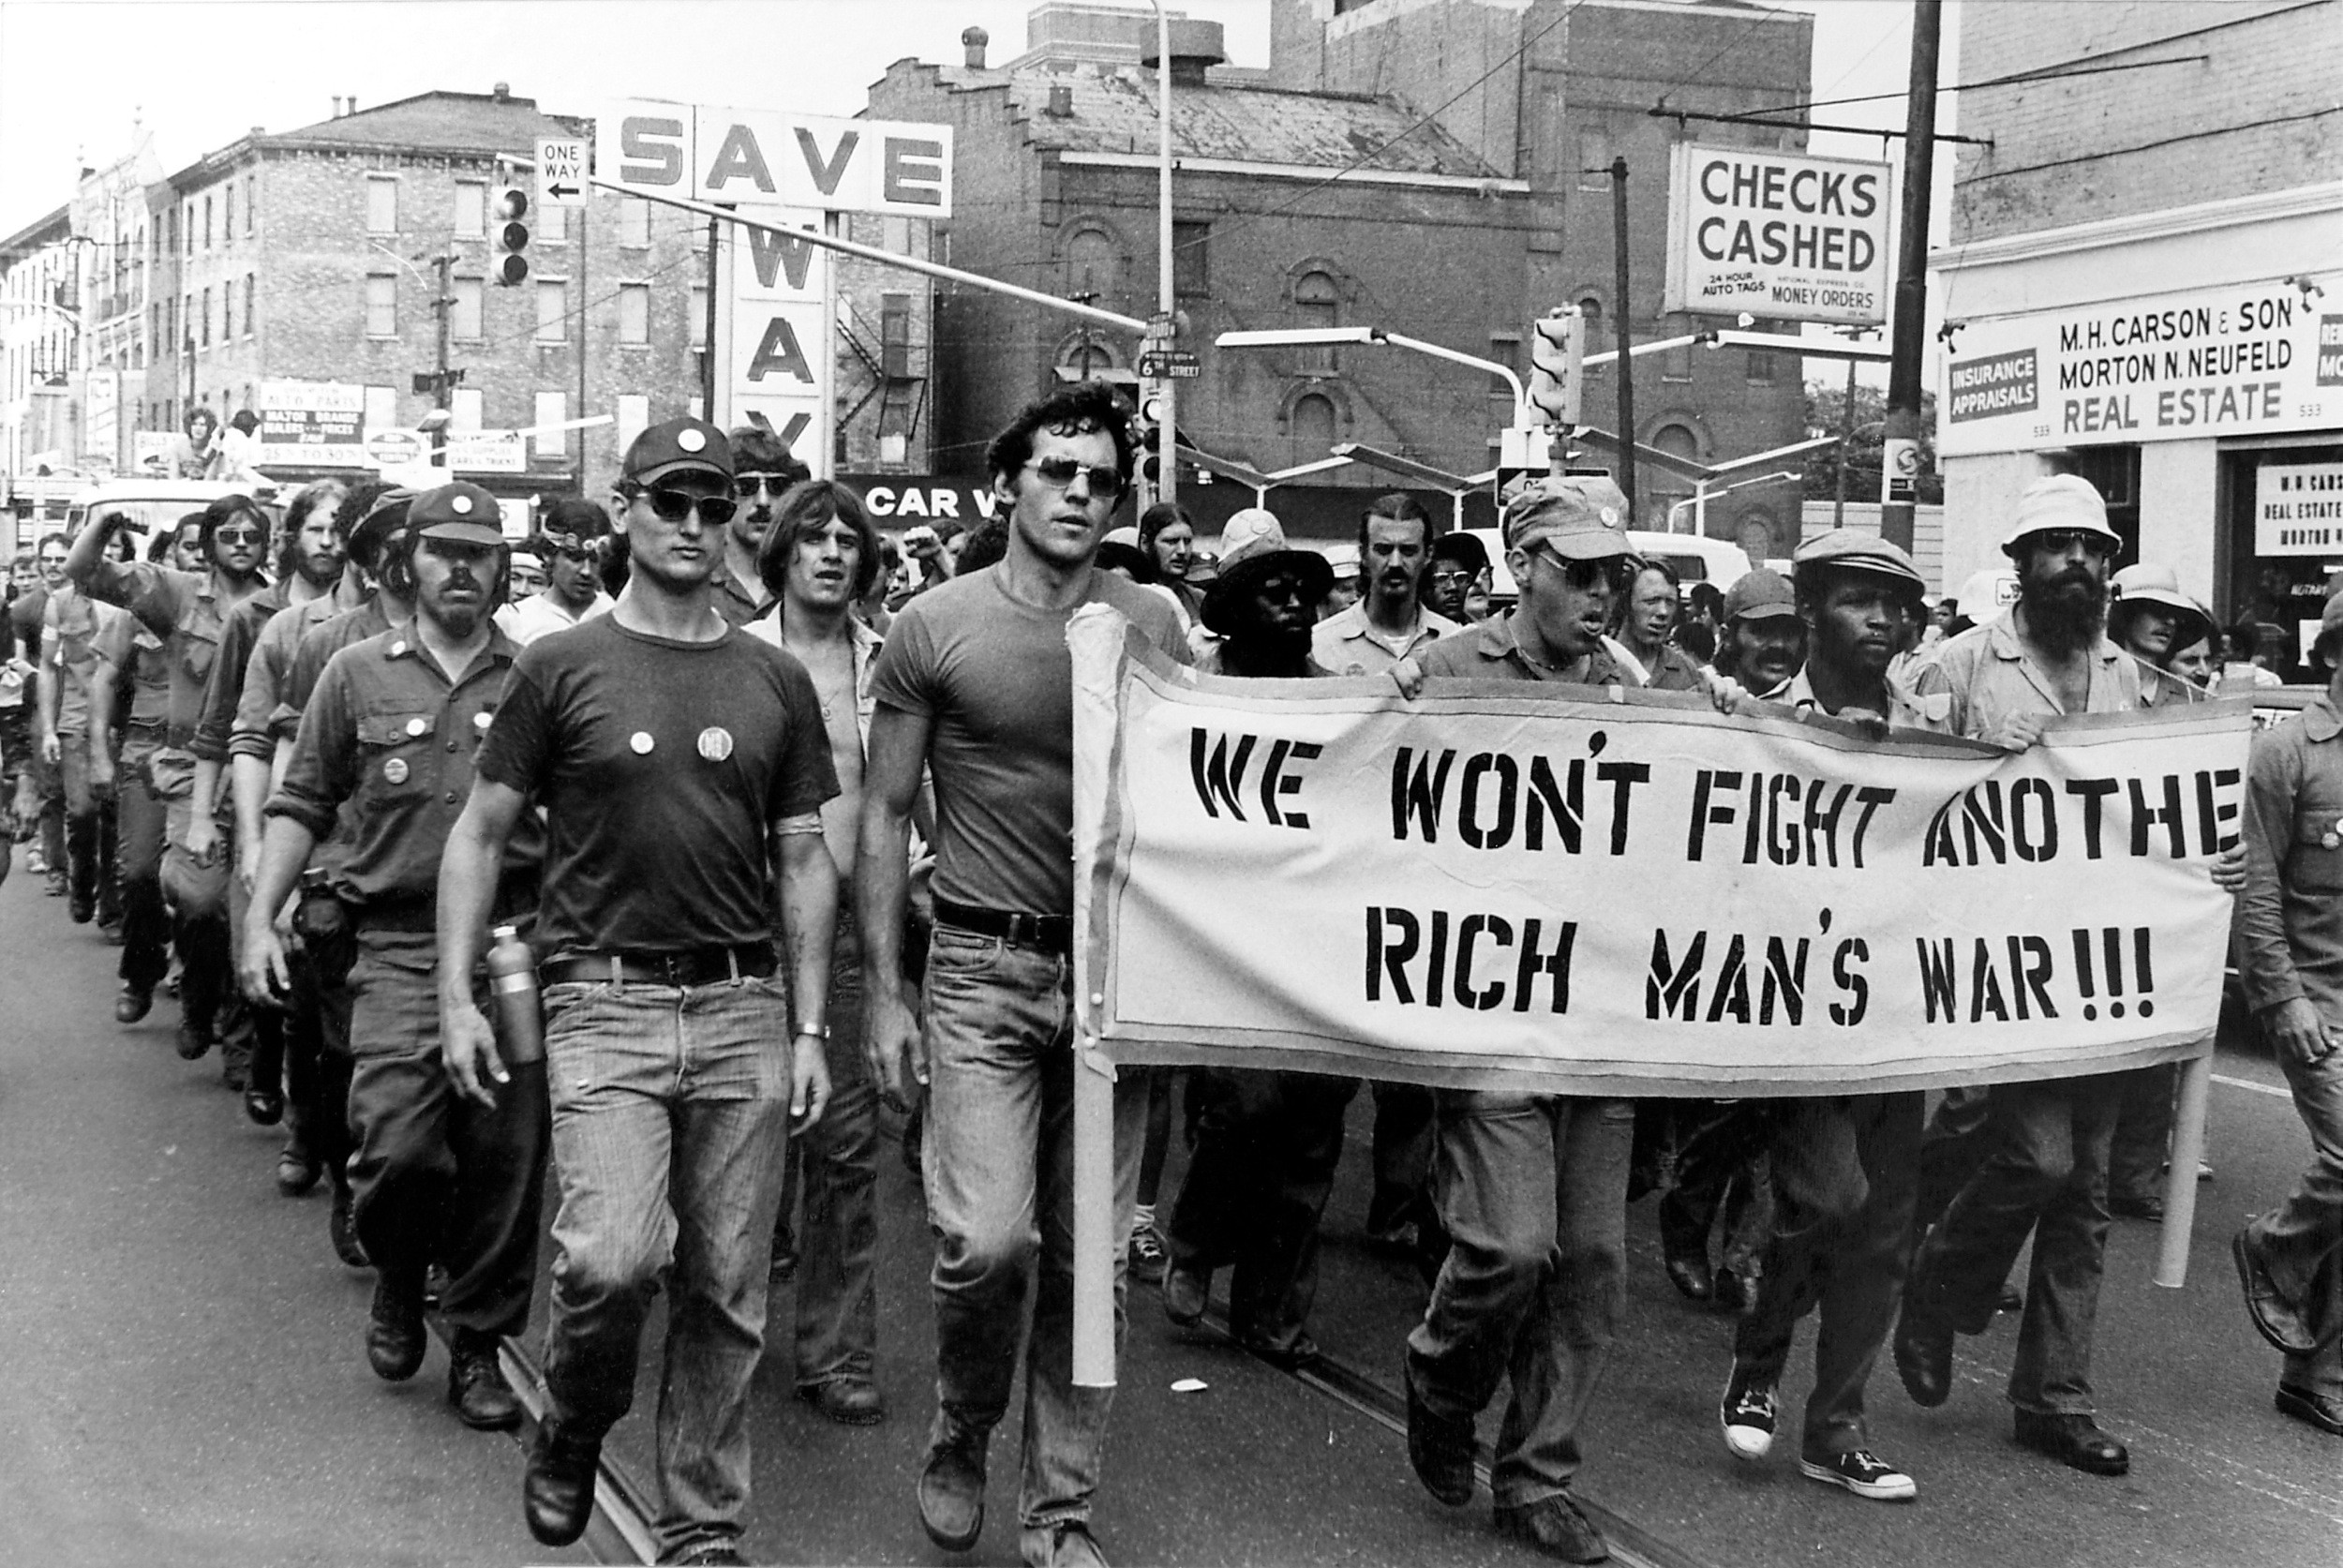 “We won’t fight another rich man’s war”, 1970